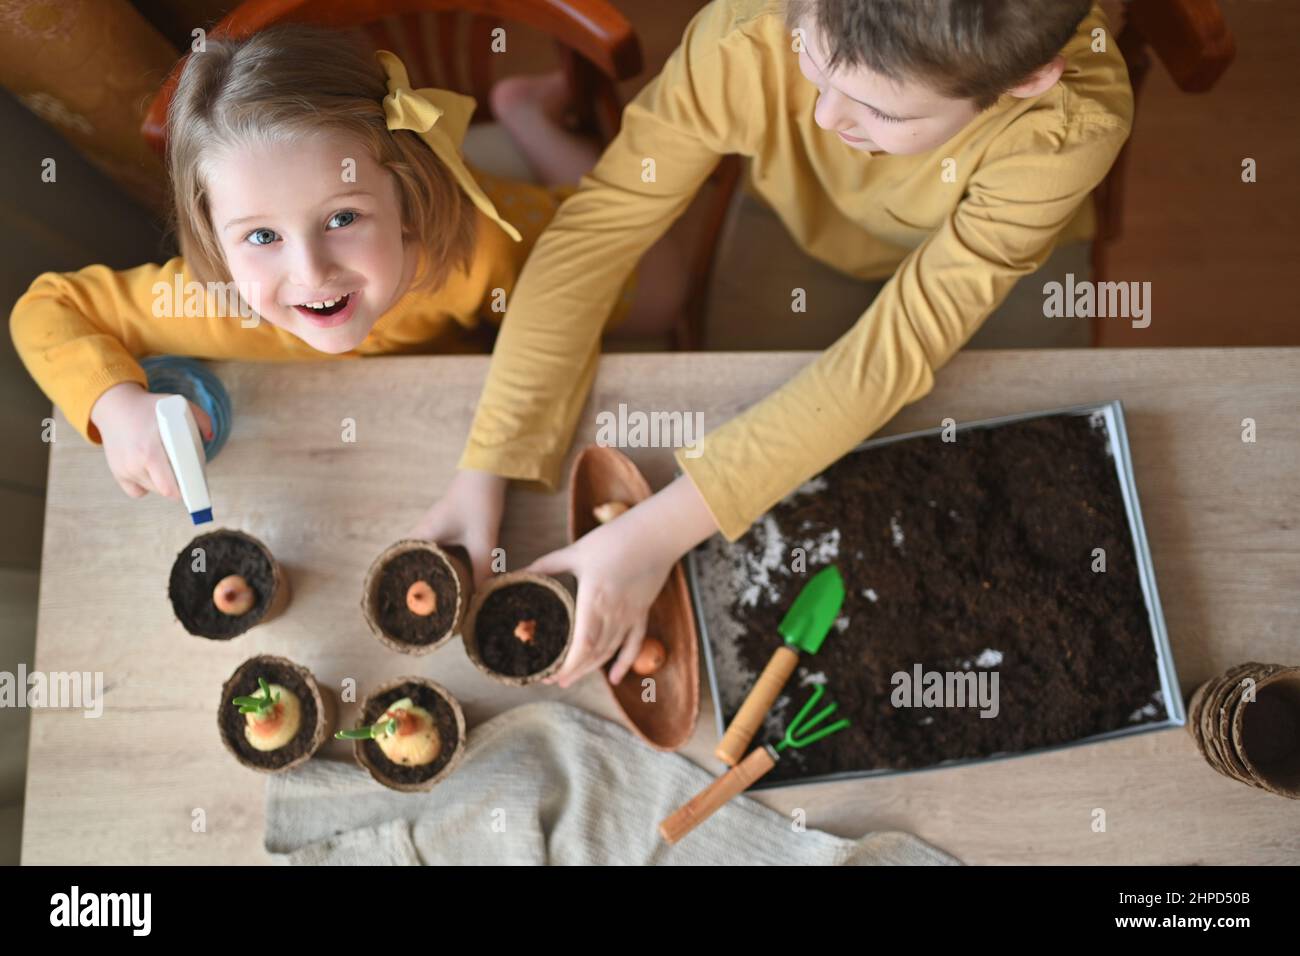 Happy children are planting plants at home. girl and boy sow seeds in natural gardening pots. Stock Photo